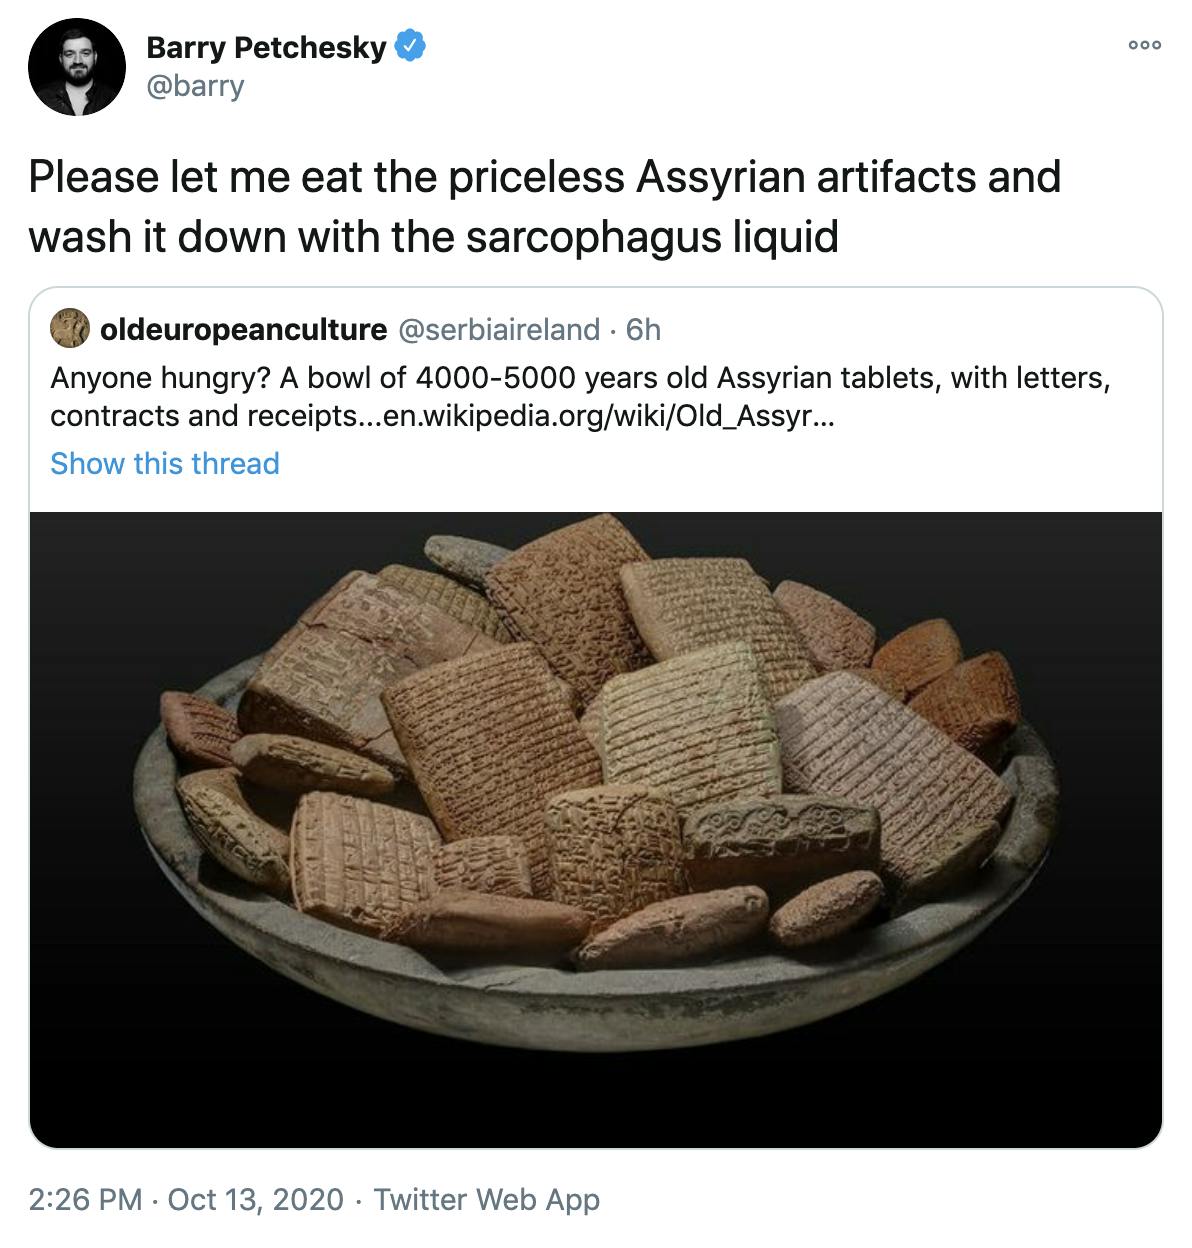 'Please let me eat the priceless Assyrian artifacts and wash it down with the sarcophagus liquid' embed of the original tweet